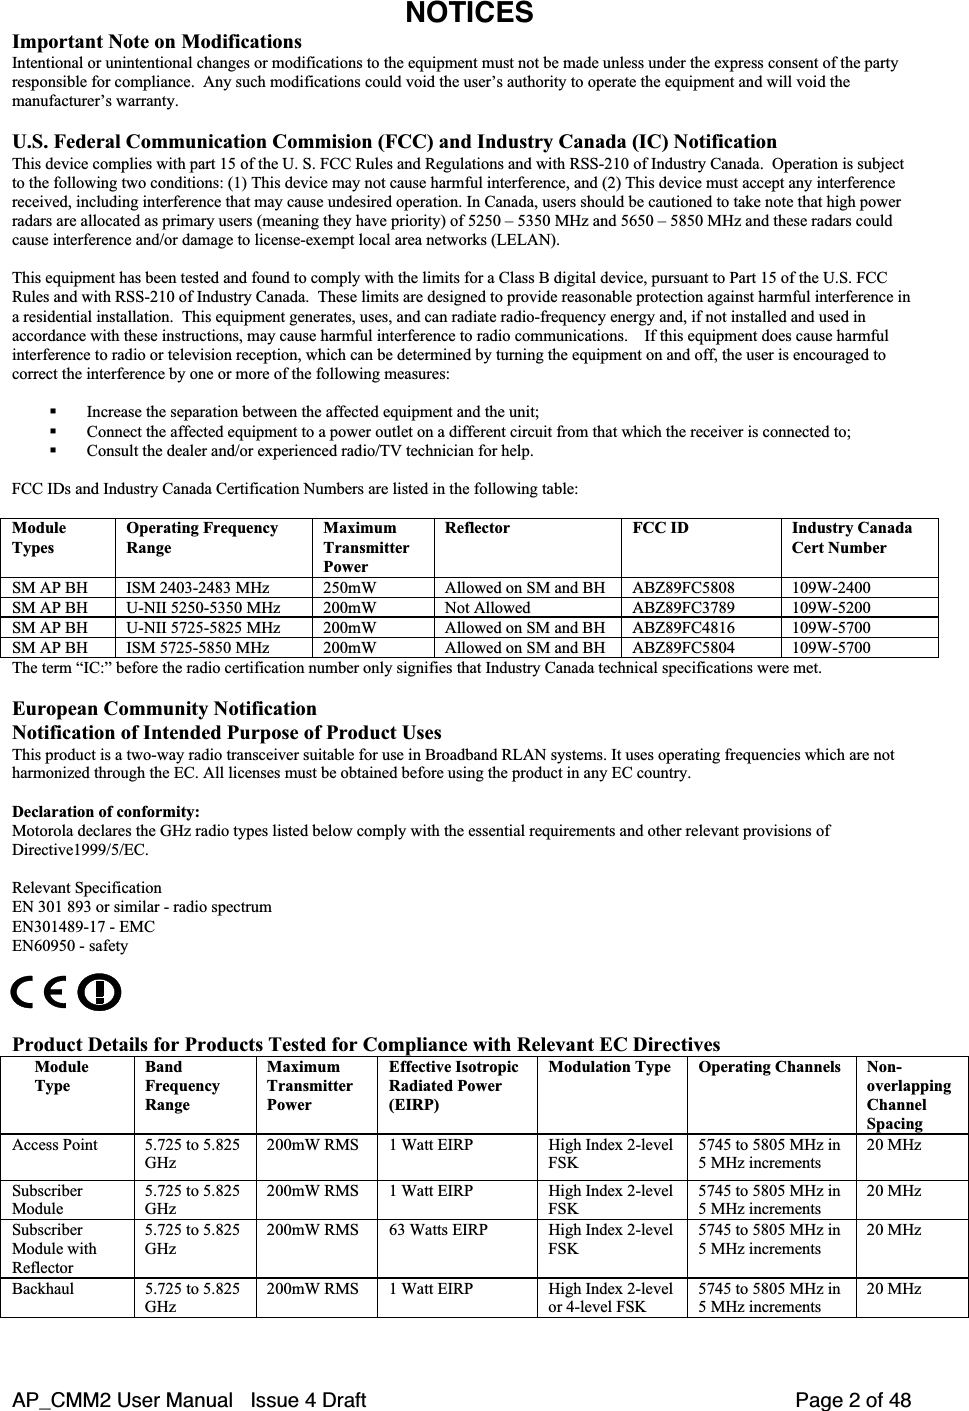 AP_CMM2 User Manual   Issue 4 Draft         Page 2 of 48NOTICESImportant Note on ModificationsIntentional or unintentional changes or modifications to the equipment must not be made unless under the express consent of the partyresponsible for compliance.  Any such modifications could void the user’s authority to operate the equipment and will void themanufacturer’s warranty.U.S. Federal Communication Commision (FCC) and Industry Canada (IC) NotificationThis device complies with part 15 of the U. S. FCC Rules and Regulations and with RSS-210 of Industry Canada.  Operation is subjectto the following two conditions: (1) This device may not cause harmful interference, and (2) This device must accept any interferencereceived, including interference that may cause undesired operation. In Canada, users should be cautioned to take note that high powerradars are allocated as primary users (meaning they have priority) of 5250 – 5350 MHz and 5650 – 5850 MHz and these radars couldcause interference and/or damage to license-exempt local area networks (LELAN).This equipment has been tested and found to comply with the limits for a Class B digital device, pursuant to Part 15 of the U.S. FCCRules and with RSS-210 of Industry Canada.  These limits are designed to provide reasonable protection against harmful interference ina residential installation.  This equipment generates, uses, and can radiate radio-frequency energy and, if not installed and used inaccordance with these instructions, may cause harmful interference to radio communications.    If this equipment does cause harmfulinterference to radio or television reception, which can be determined by turning the equipment on and off, the user is encouraged tocorrect the interference by one or more of the following measures: Increase the separation between the affected equipment and the unit; Connect the affected equipment to a power outlet on a different circuit from that which the receiver is connected to; Consult the dealer and/or experienced radio/TV technician for help.FCC IDs and Industry Canada Certification Numbers are listed in the following table:ModuleTypesOperating FrequencyRangeMaximumTransmitterPowerReflector FCC ID Industry CanadaCert NumberSM AP BH ISM 2403-2483 MHz 250mW Allowed on SM and BH ABZ89FC5808 109W-2400SM AP BH U-NII 5250-5350 MHz 200mW Not Allowed ABZ89FC3789 109W-5200SM AP BH U-NII 5725-5825 MHz 200mW Allowed on SM and BH ABZ89FC4816 109W-5700SM AP BH ISM 5725-5850 MHz 200mW Allowed on SM and BH ABZ89FC5804 109W-5700The term “IC:” before the radio certification number only signifies that Industry Canada technical specifications were met.European Community NotificationNotification of Intended Purpose of Product UsesThis product is a two-way radio transceiver suitable for use in Broadband RLAN systems. It uses operating frequencies which are notharmonized through the EC. All licenses must be obtained before using the product in any EC country.Declaration of conformity:Motorola declares the GHz radio types listed below comply with the essential requirements and other relevant provisions ofDirective1999/5/EC.Relevant SpecificationEN 301 893 or similar - radio spectrumEN301489-17 - EMCEN60950 - safetyProduct Details for Products Tested for Compliance with Relevant EC DirectivesModuleTypeBandFrequencyRangeMaximumTransmitterPowerEffective IsotropicRadiated Power(EIRP)Modulation Type Operating Channels Non-overlappingChannelSpacingAccess Point 5.725 to 5.825GHz200mW RMS 1 Watt EIRP High Index 2-levelFSK5745 to 5805 MHz in5 MHz increments20 MHzSubscriberModule5.725 to 5.825GHz200mW RMS 1 Watt EIRP High Index 2-levelFSK5745 to 5805 MHz in5 MHz increments20 MHzSubscriberModule withReflector5.725 to 5.825GHz200mW RMS 63 Watts EIRP High Index 2-levelFSK5745 to 5805 MHz in5 MHz increments20 MHzBackhaul 5.725 to 5.825GHz200mW RMS 1 Watt EIRP High Index 2-levelor 4-level FSK5745 to 5805 MHz in5 MHz increments20 MHz